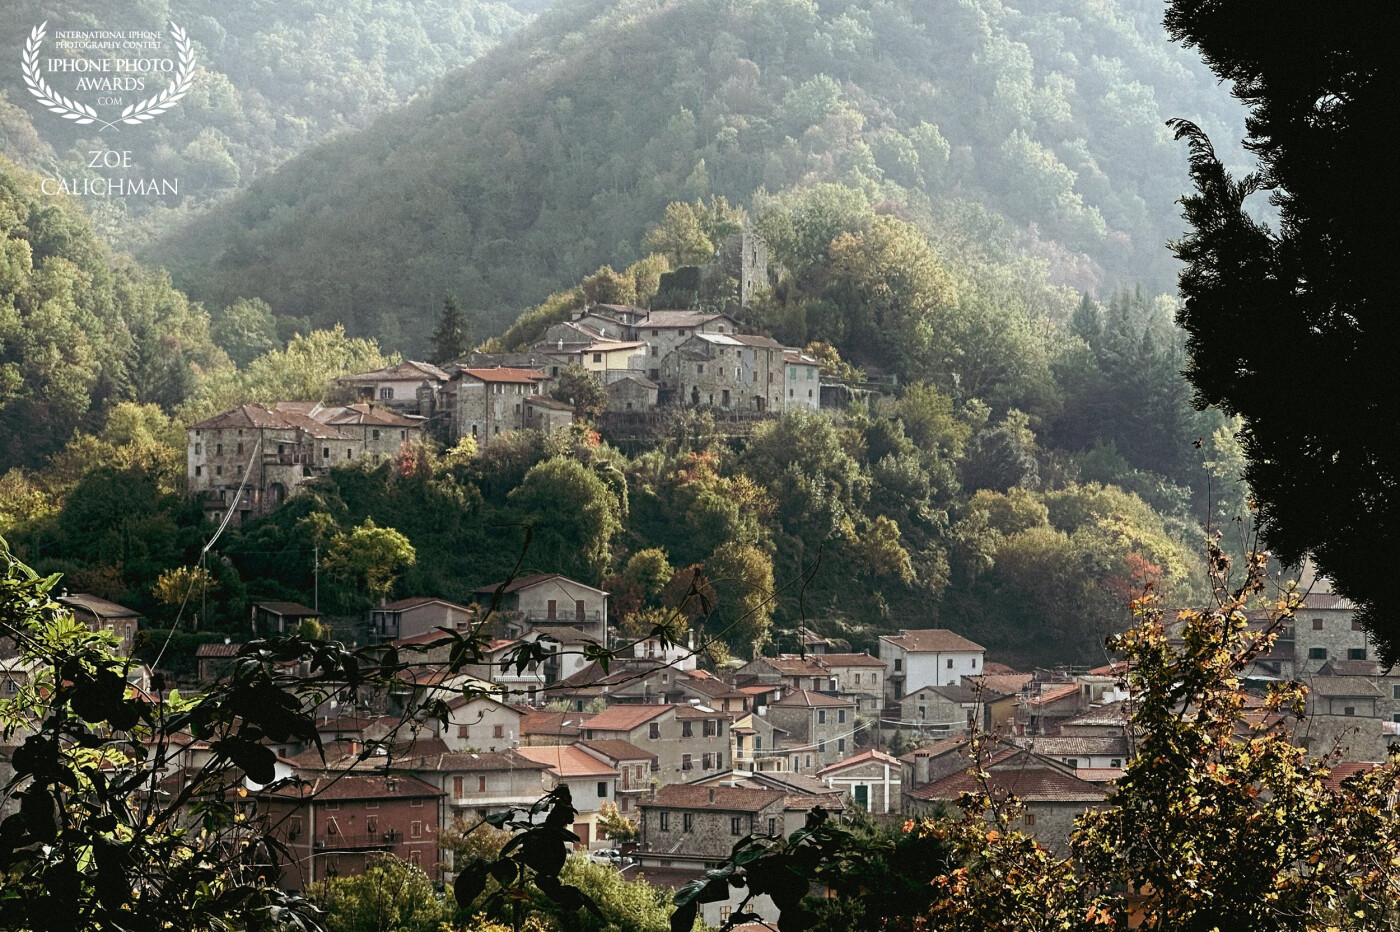 A remote village in the Tuscany. Tranquil and simple; the type of life style I long for these days.